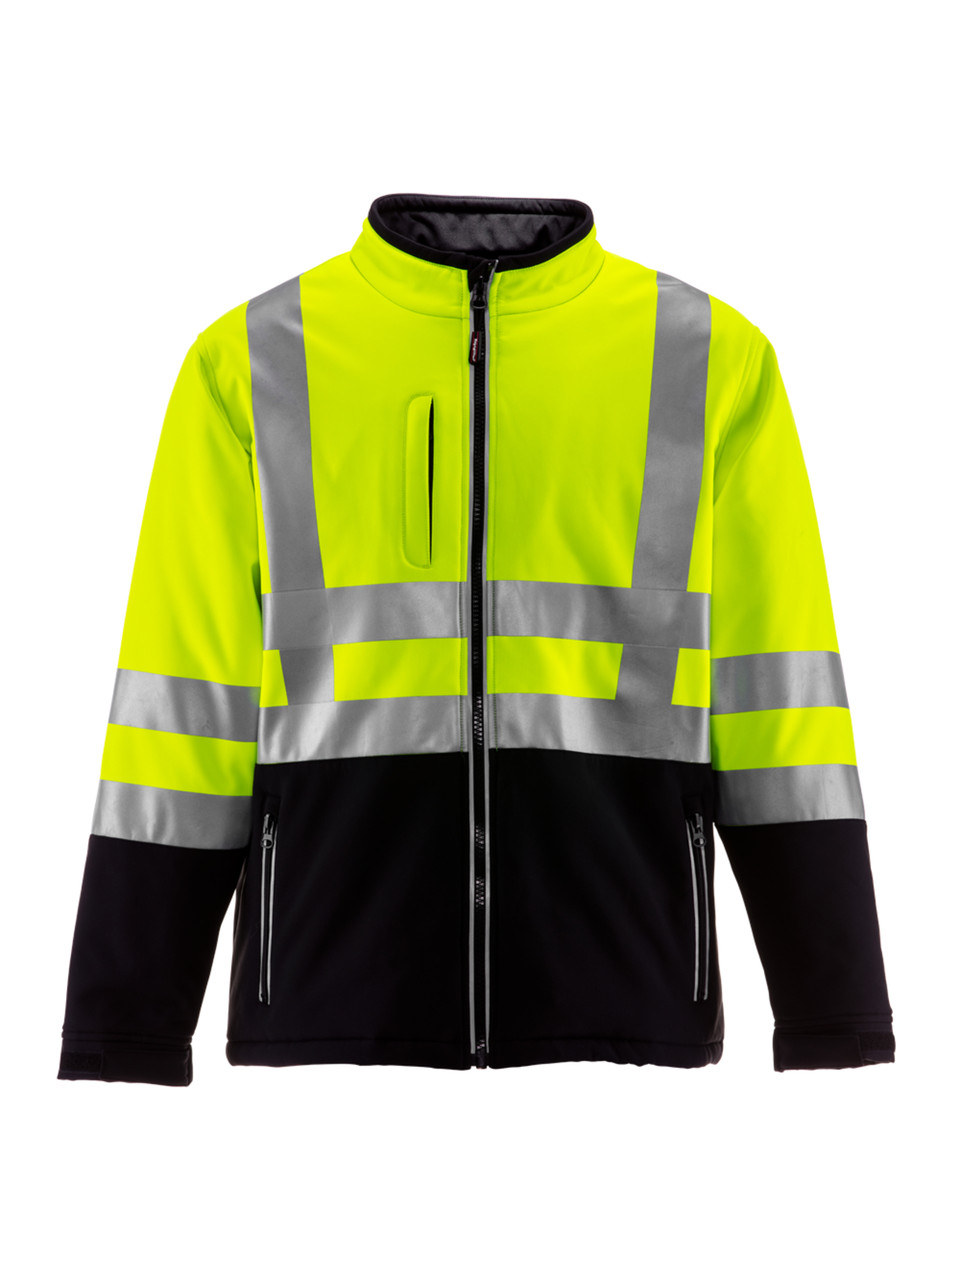 HiVis Insulated Softshell Jacket